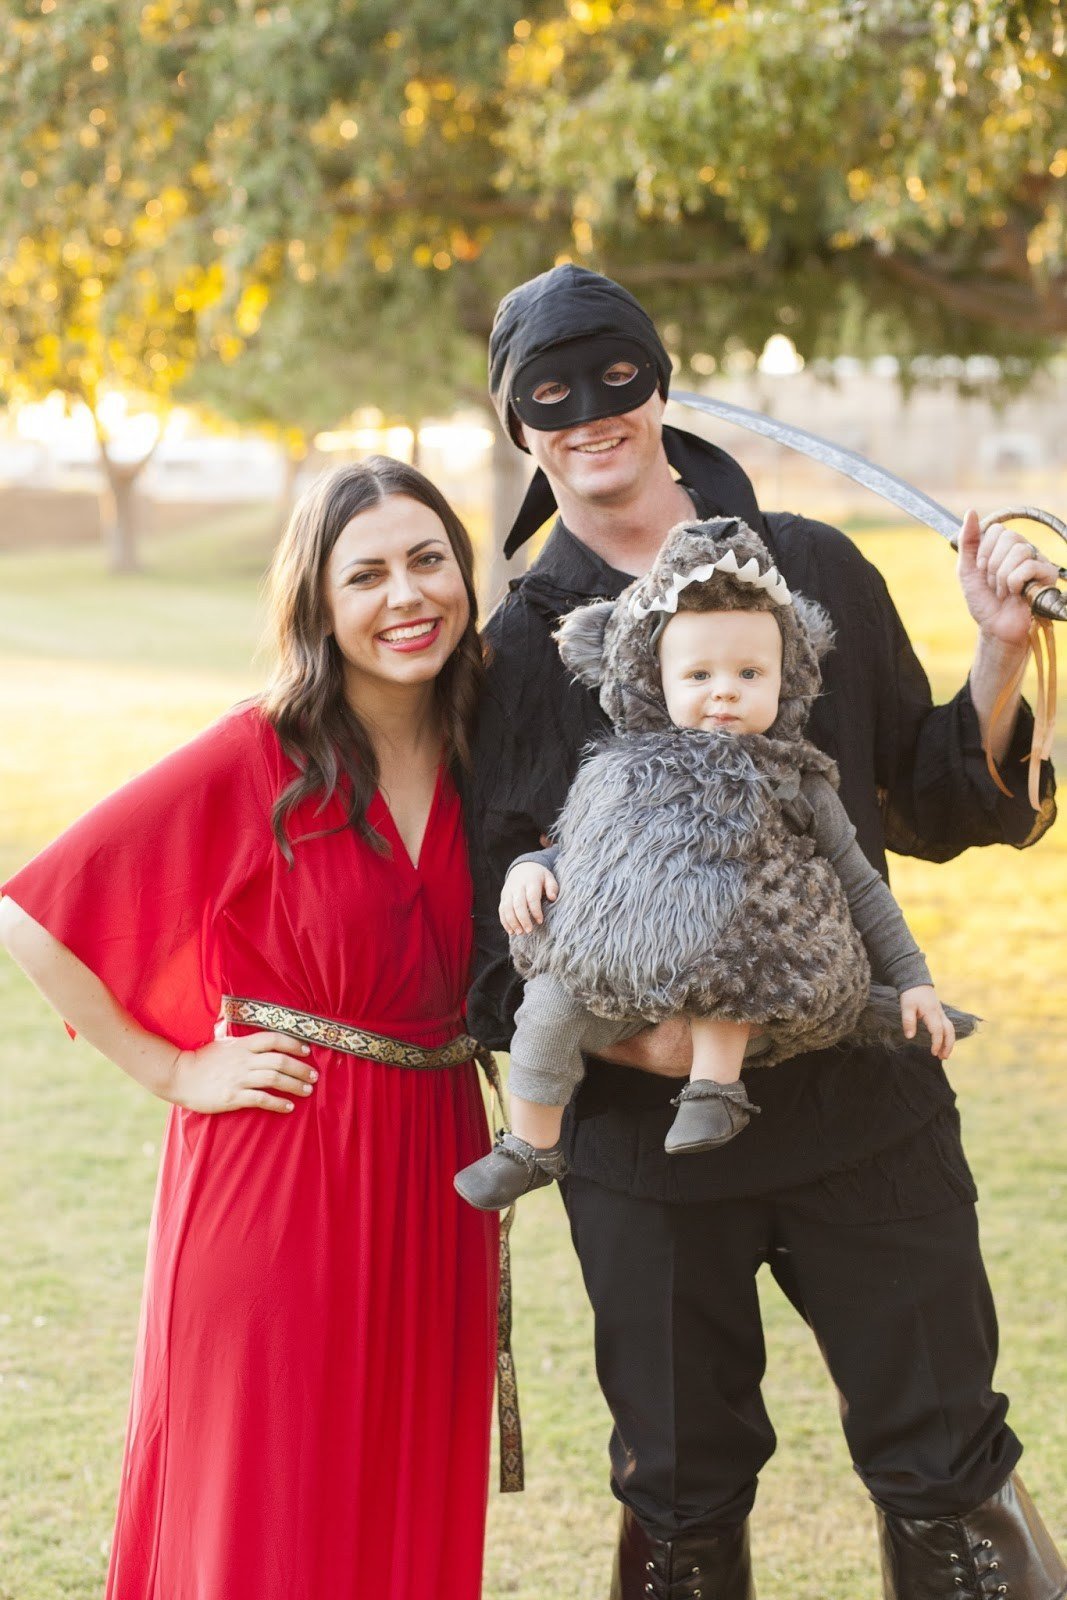 50 of the Cutest, Funniest Family Halloween Costume Ideas for Your Entire Crew